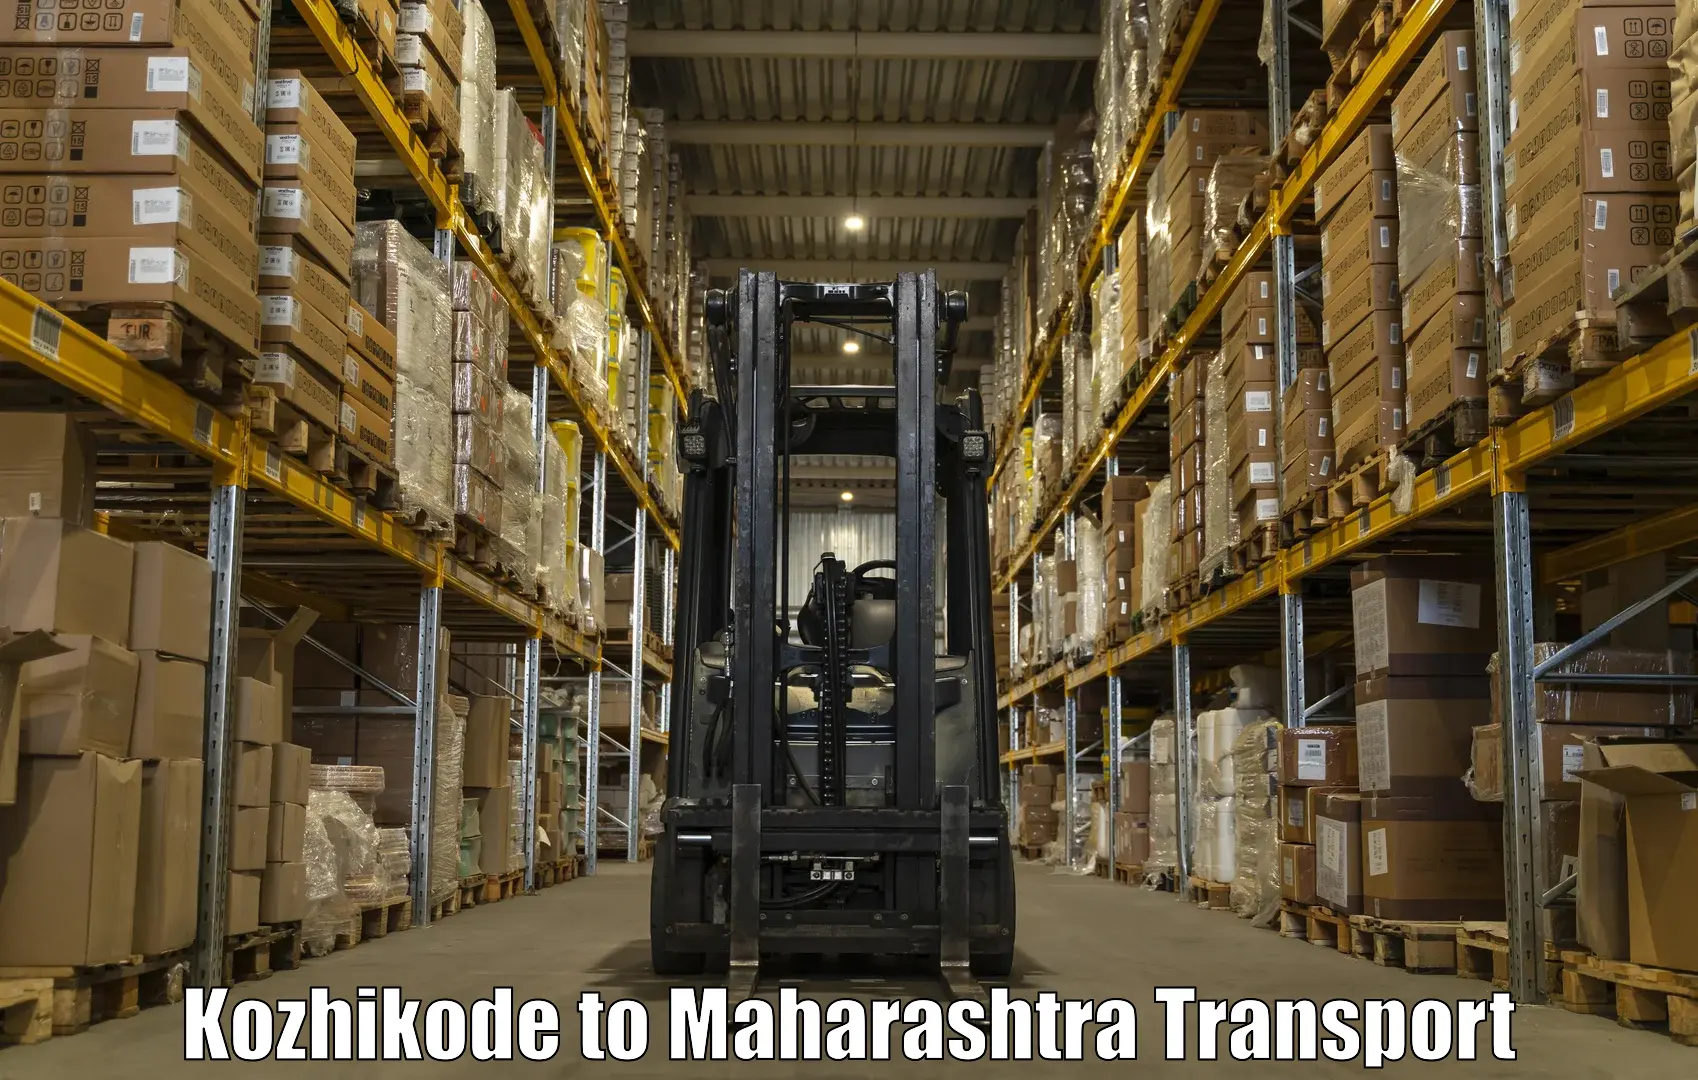 Air freight transport services Kozhikode to Andheri